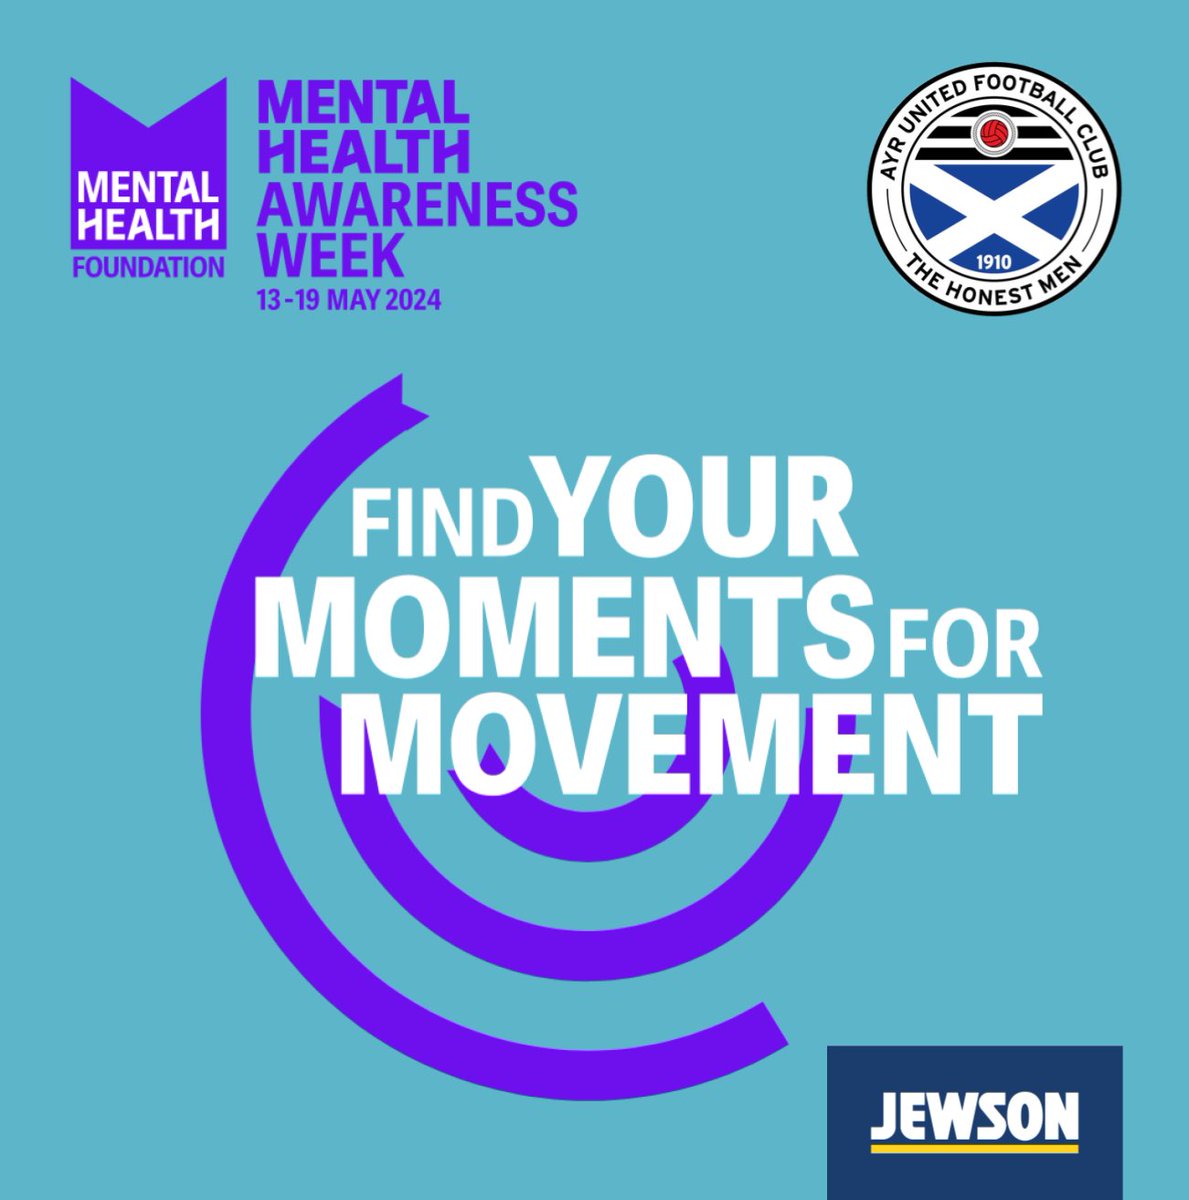 Ayr United are proud to support @mentalhealth this #MentalHealthAwarenessWeek - join in and help to create a world with good mental health for all ℹ️⬇️ mentalhealth.org.uk #MomentsForMovement #WeAreUnited